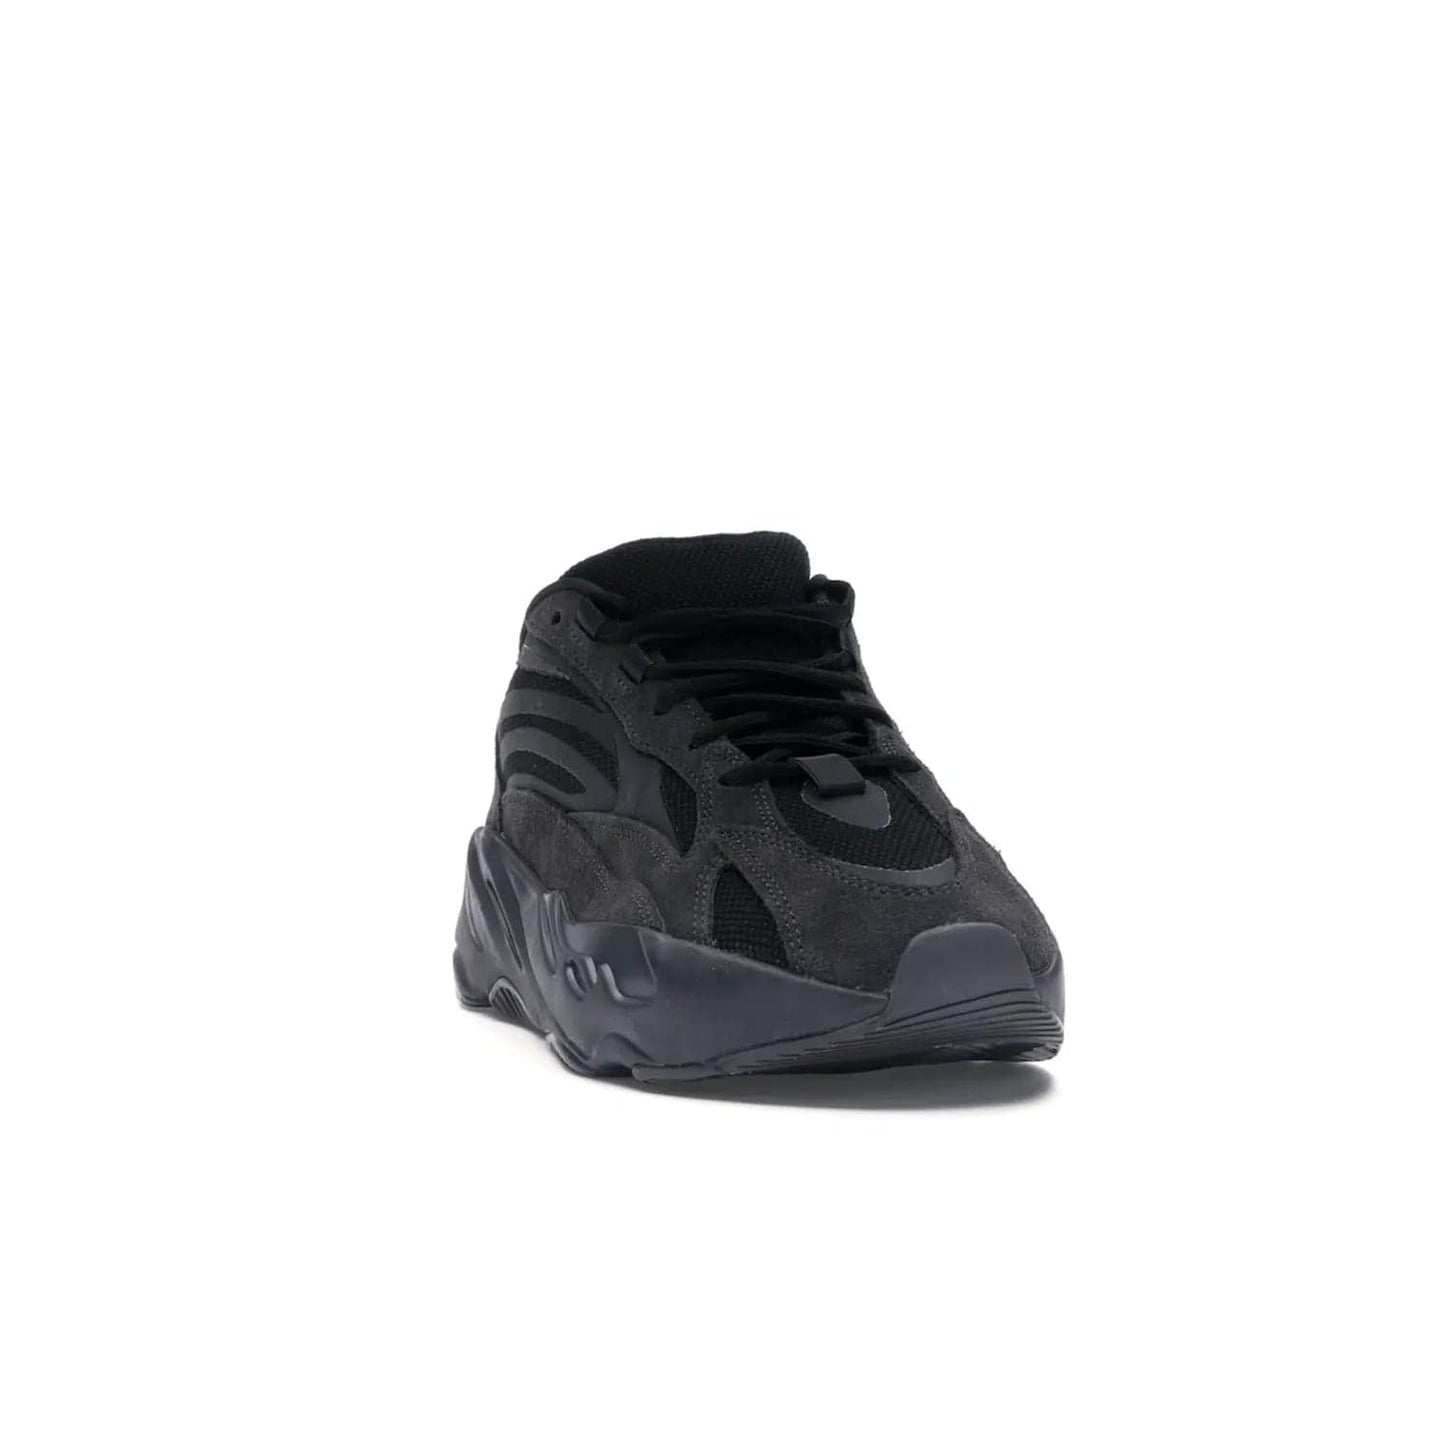 adidas Yeezy Boost 700 V2 Vanta - Image 8 - Only at www.BallersClubKickz.com - Introducing the adidas Yeezy Boost 700 V2 Vanta - a sleek and stylish all-black design featuring a combination of mesh, leather, and suede construction with signature Boost cushioning in the sole. The ultimate in comfort and support.